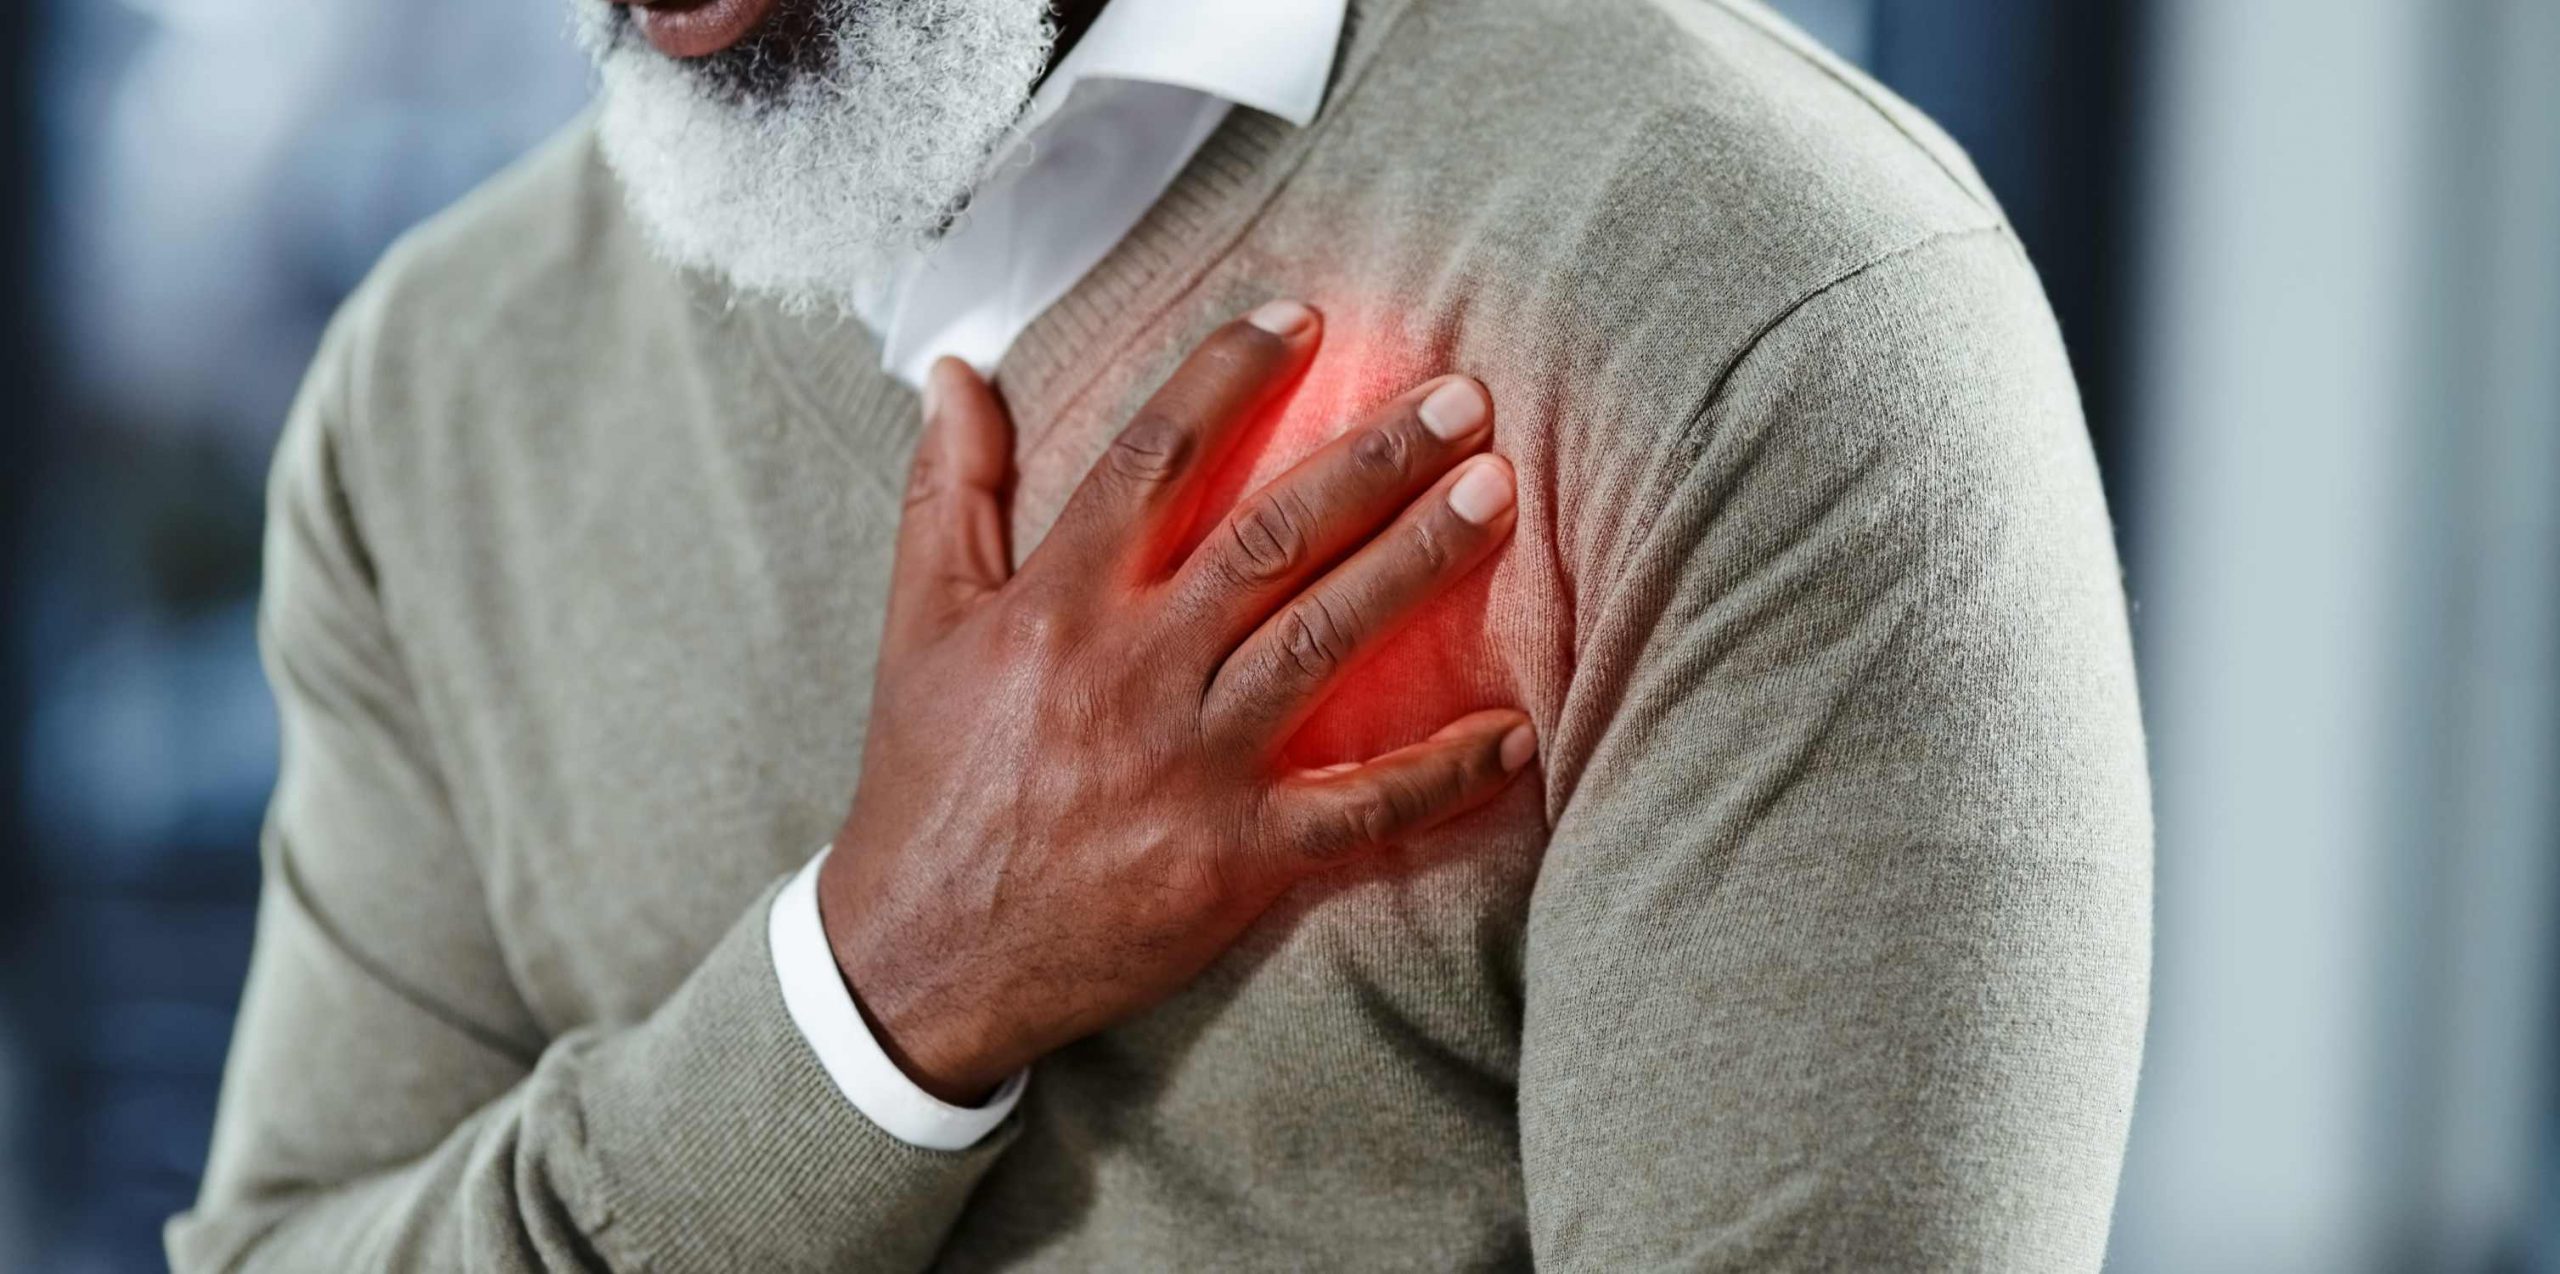 Unexpected Body Cues That Could Indicate Heart Concerns